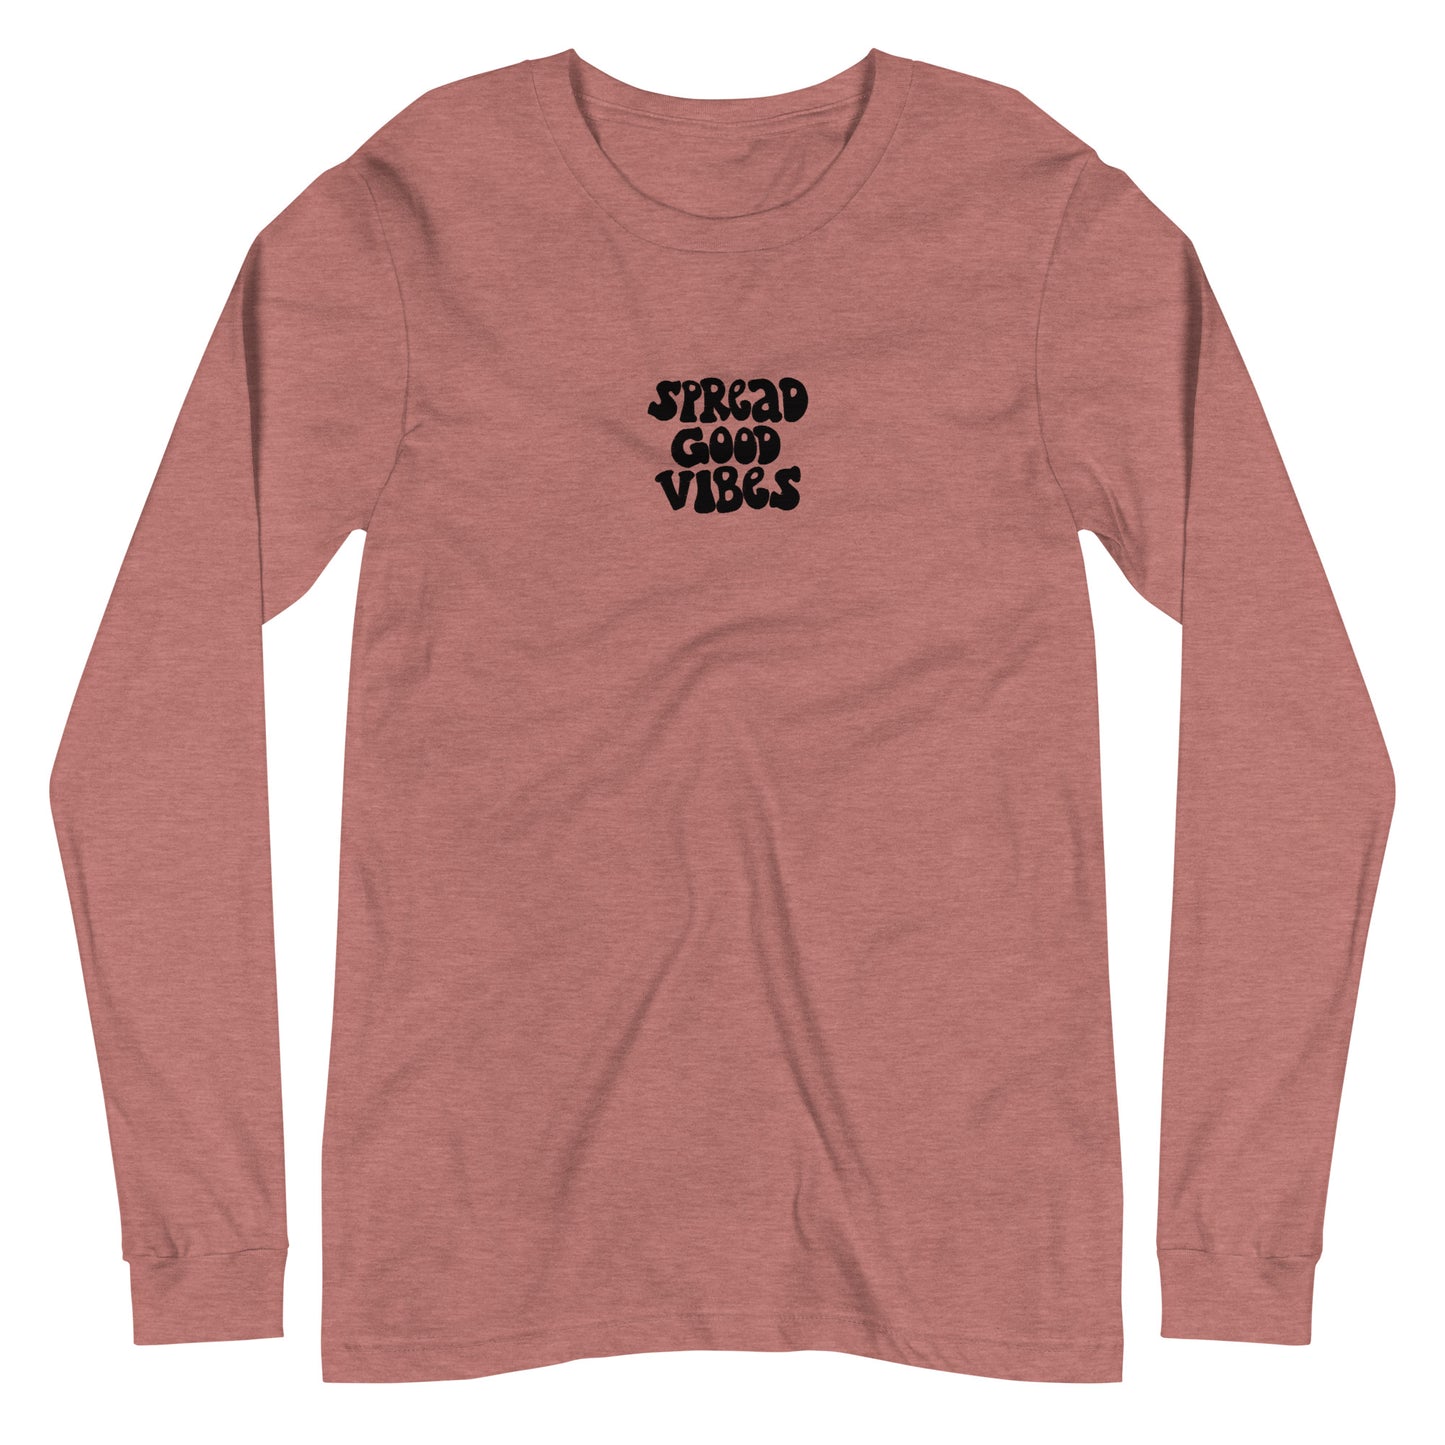 spread good vibes embroidered long sleeve tee